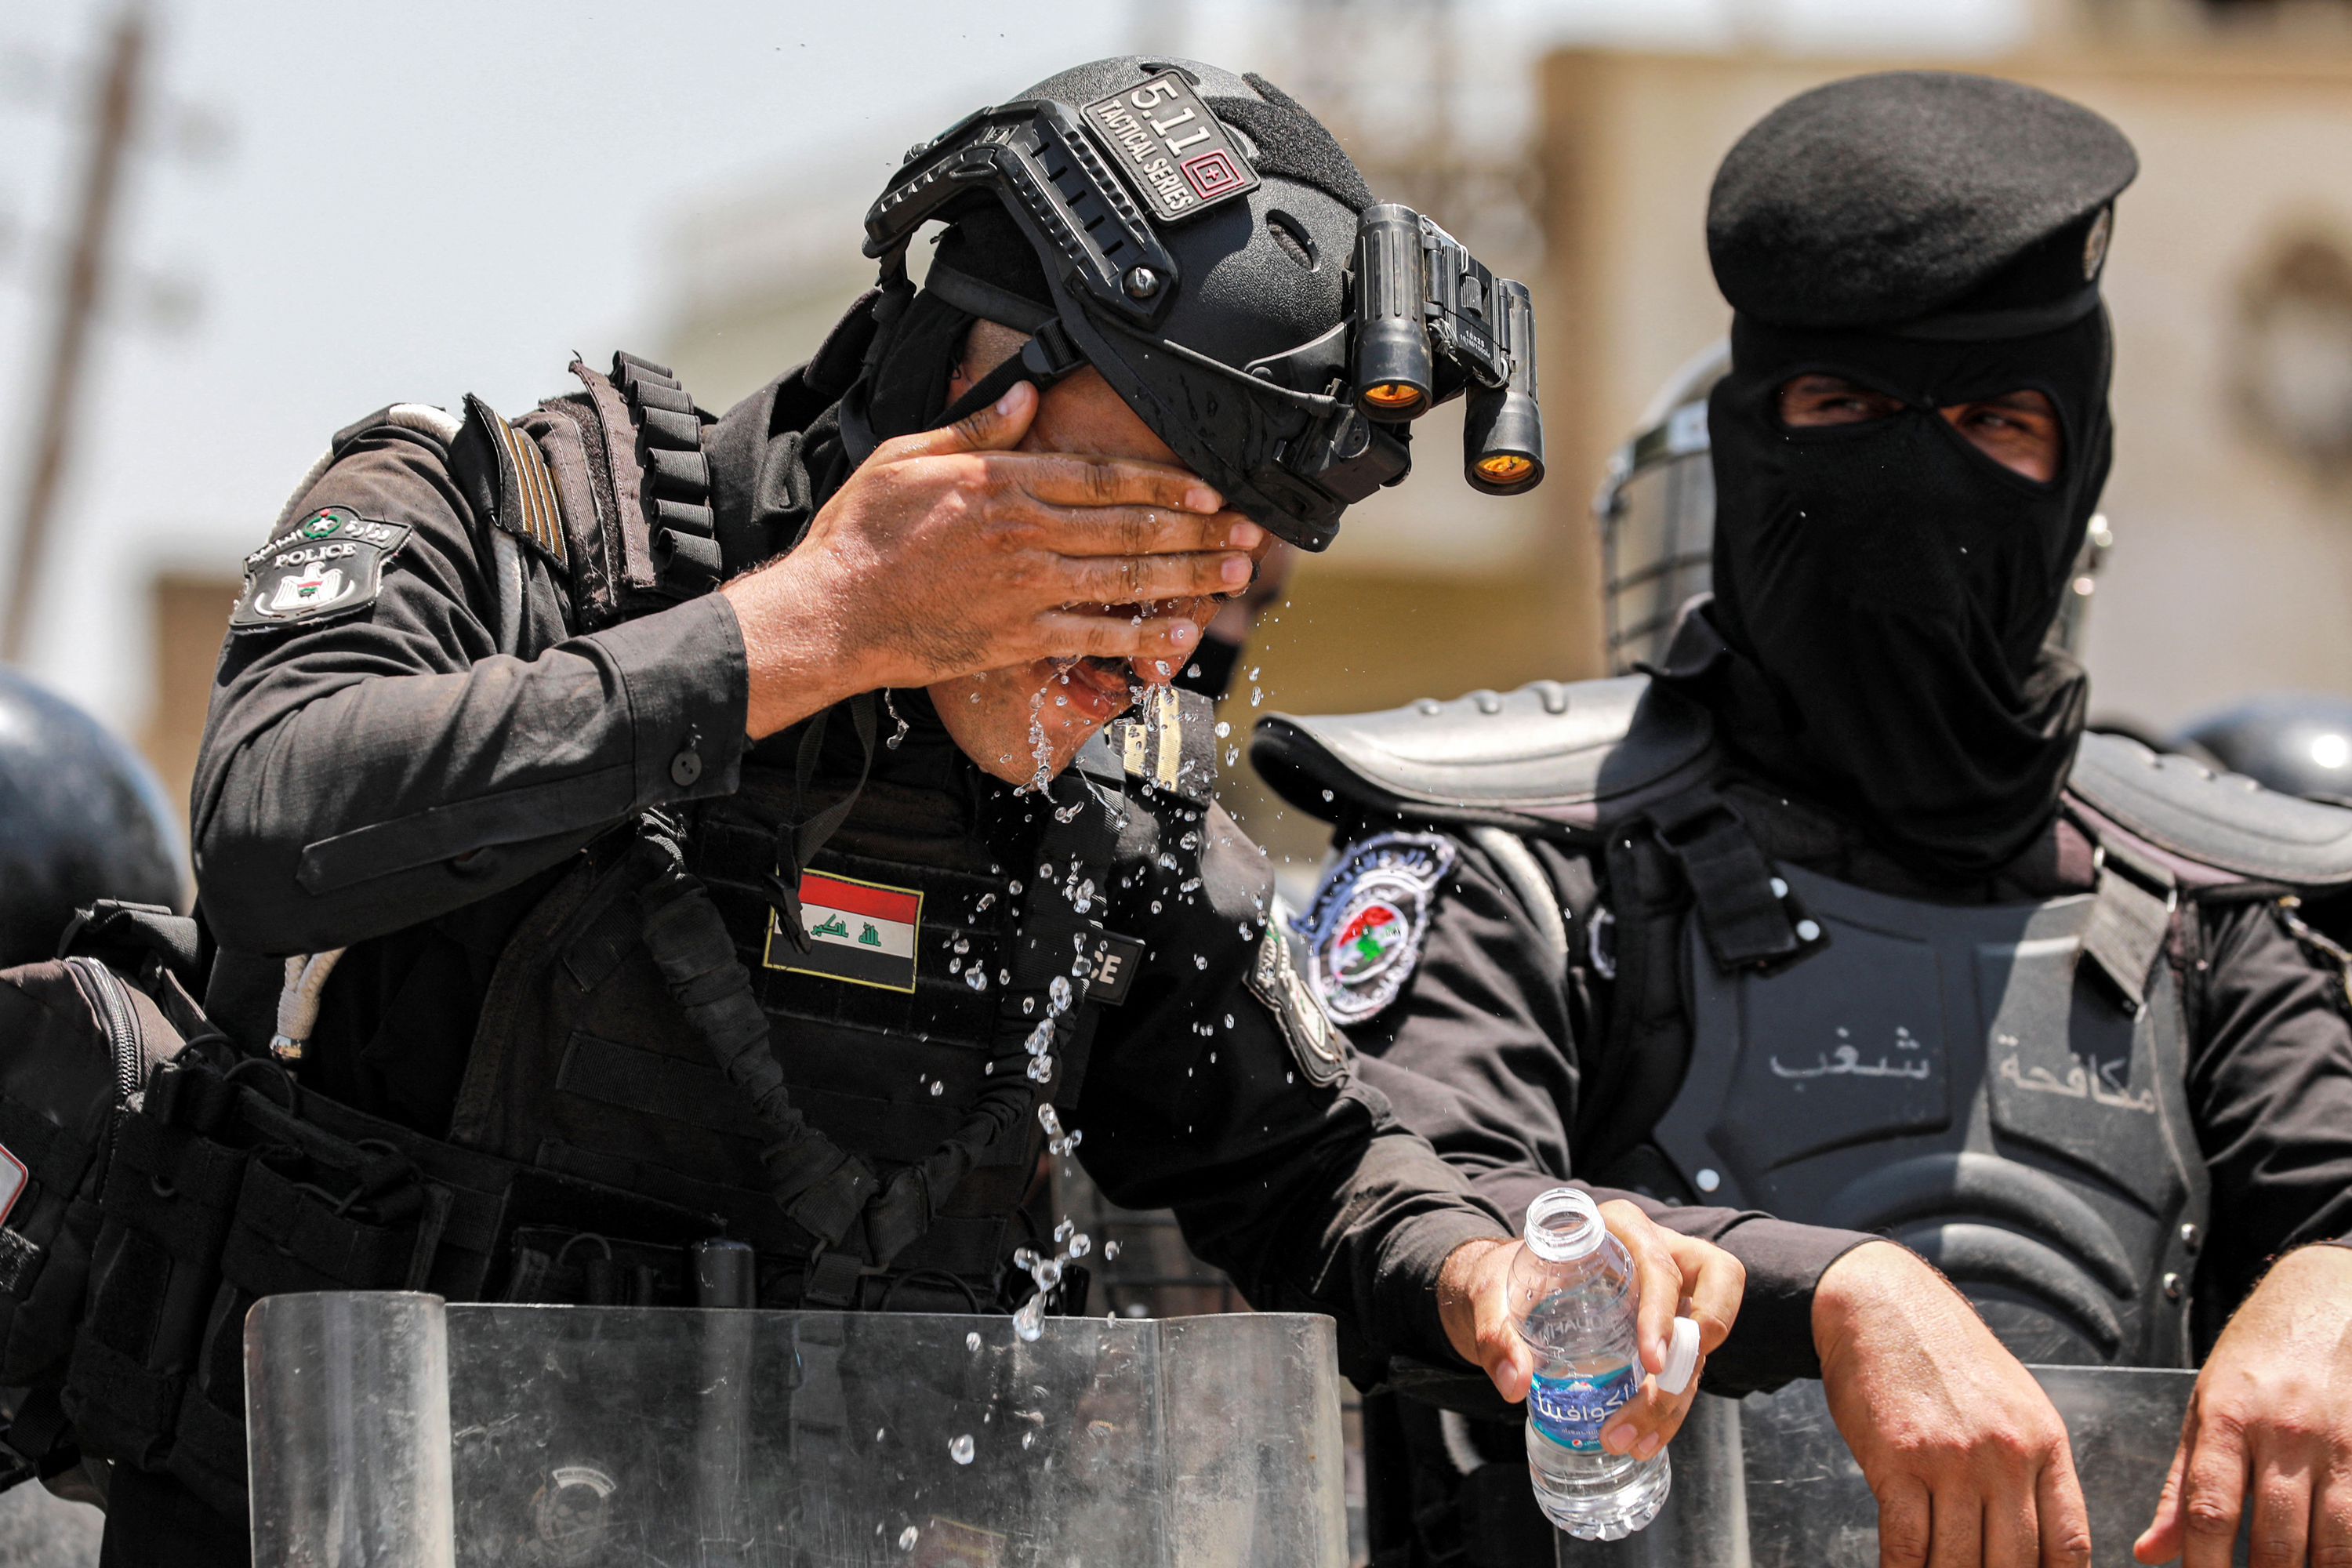 An Iraqi security forces member rinses his face with water from a bottle to cool off during a demonstration against water scarcity and power outages in Baghdad, on Tuesday.